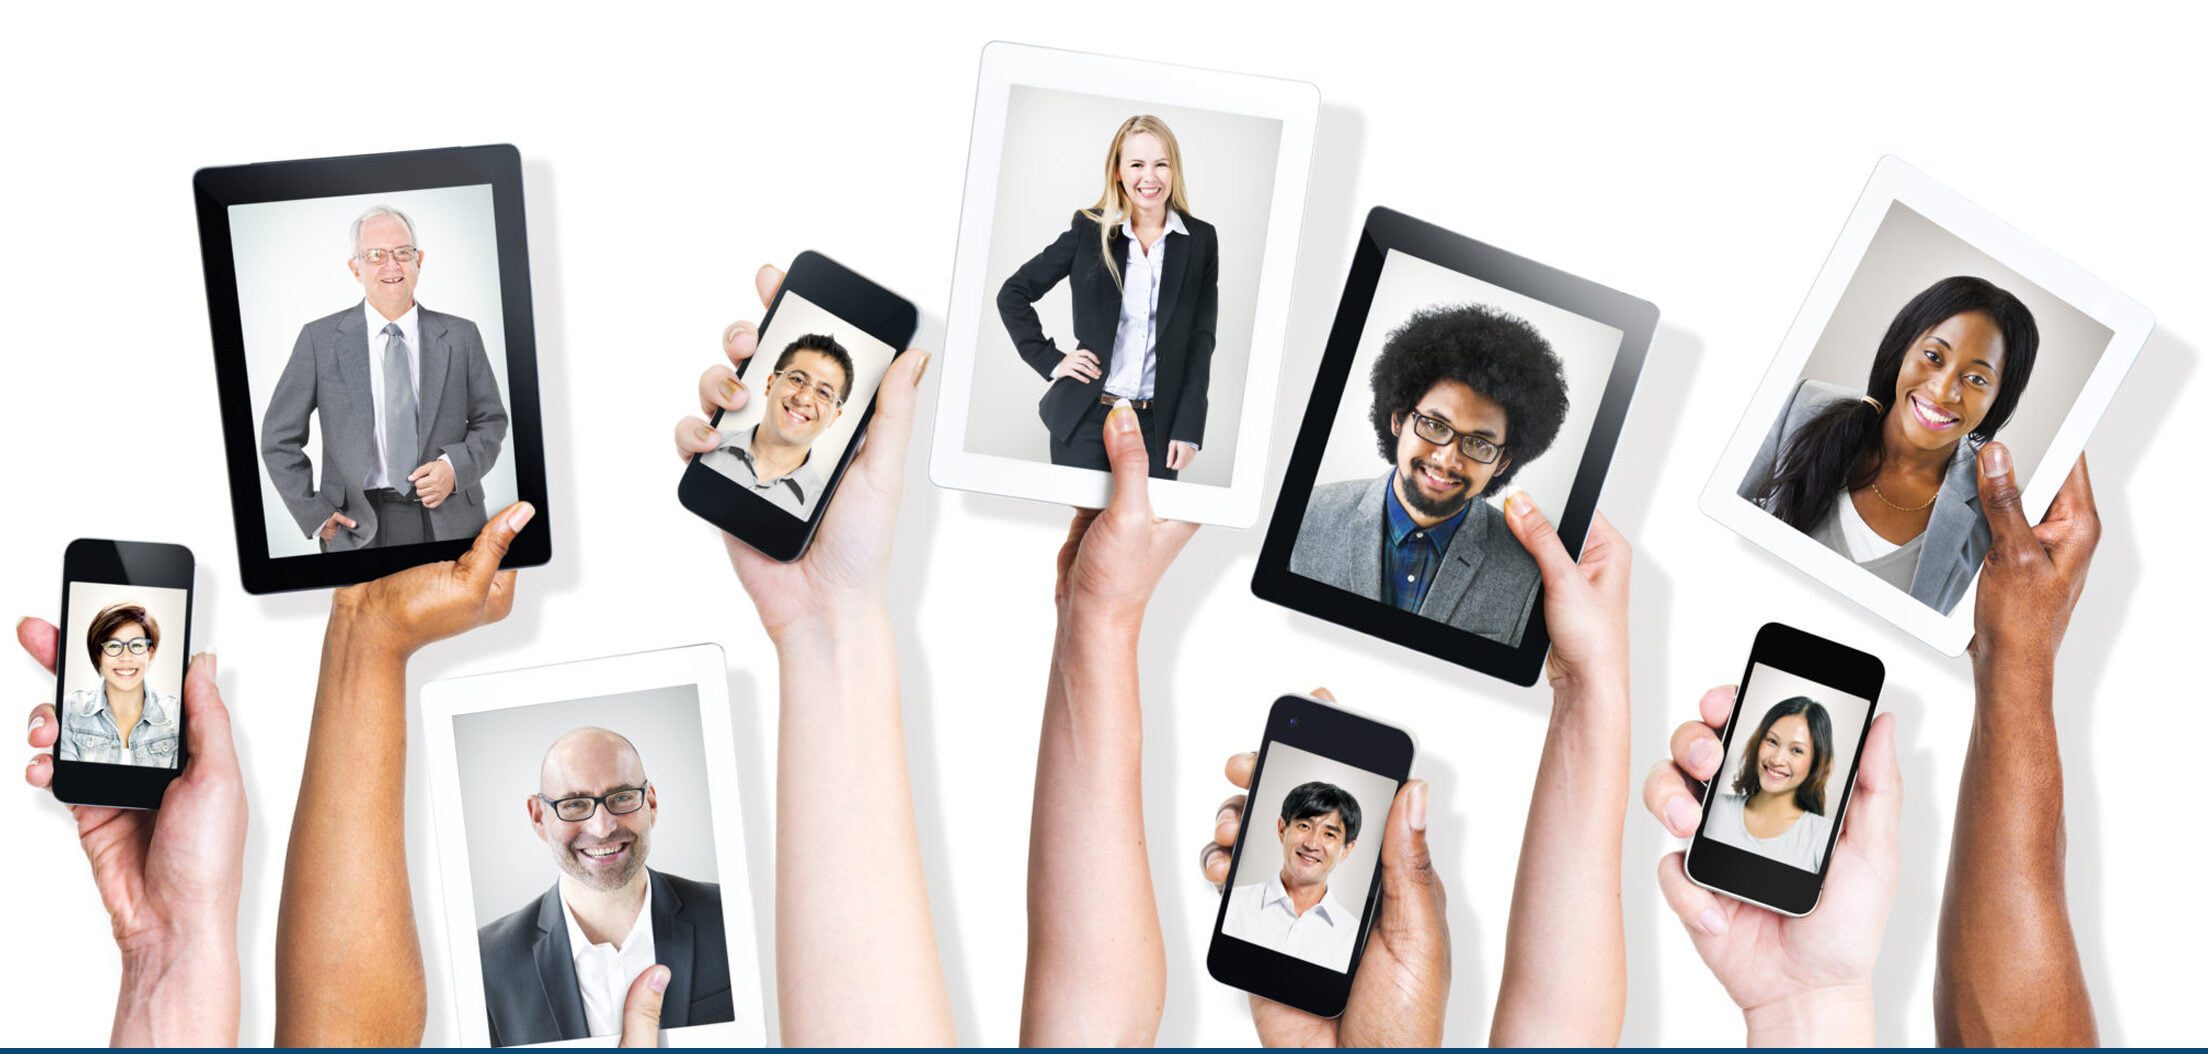 Can Your Smartphone Replace Professional Photography for Business Headshots?